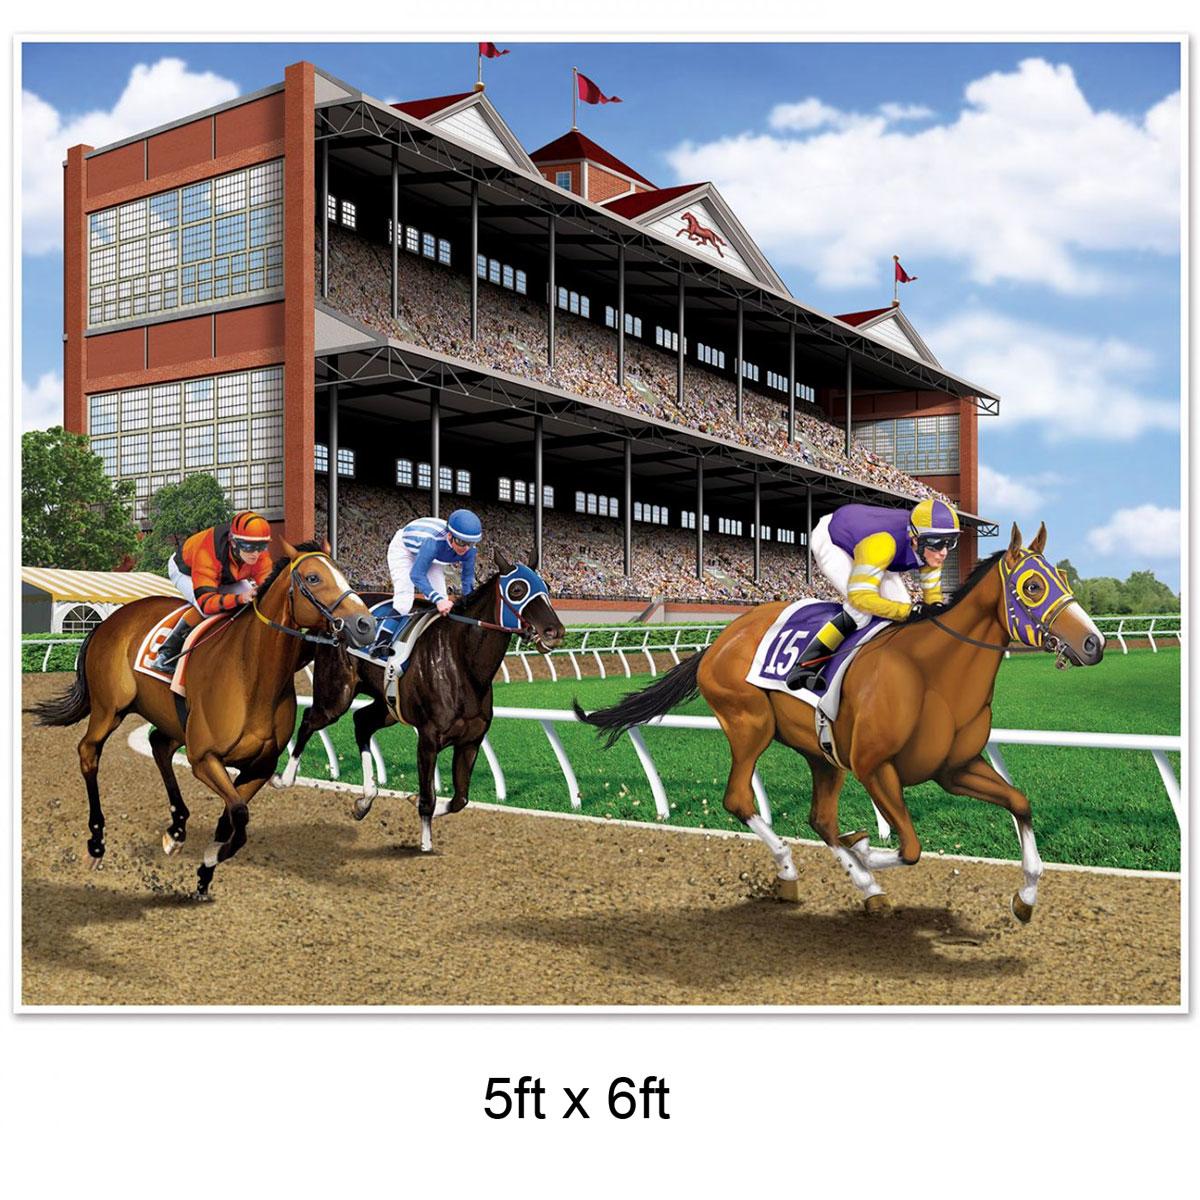 Horse Racing Insta-Mural 5ft x 6ft by Beistle 53605 available in the UK here at Karnival Costumes online party shop